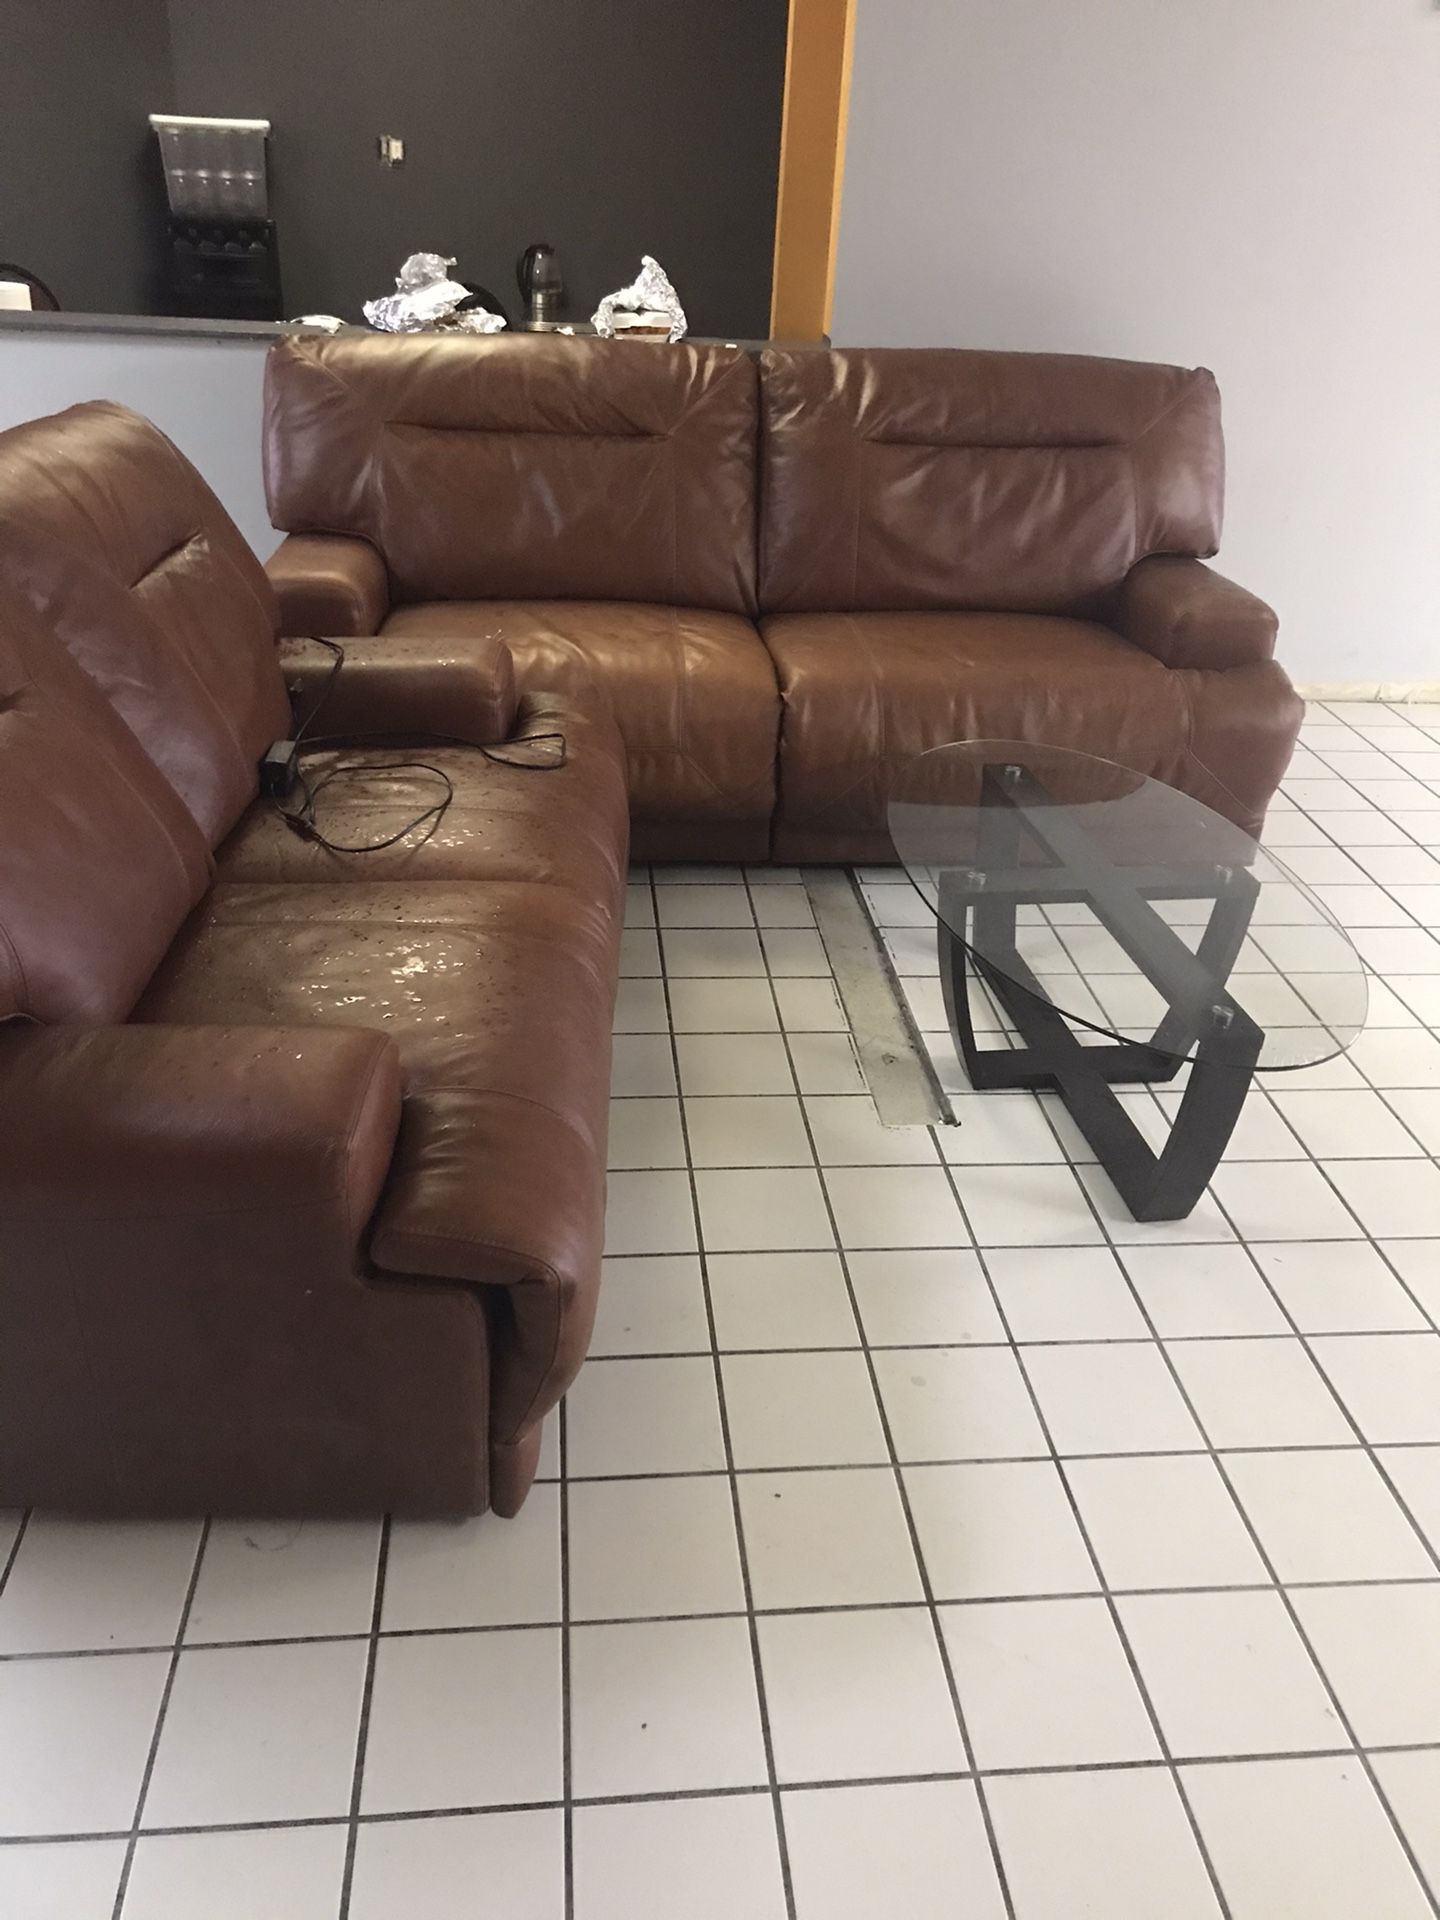 Nice leather couch set